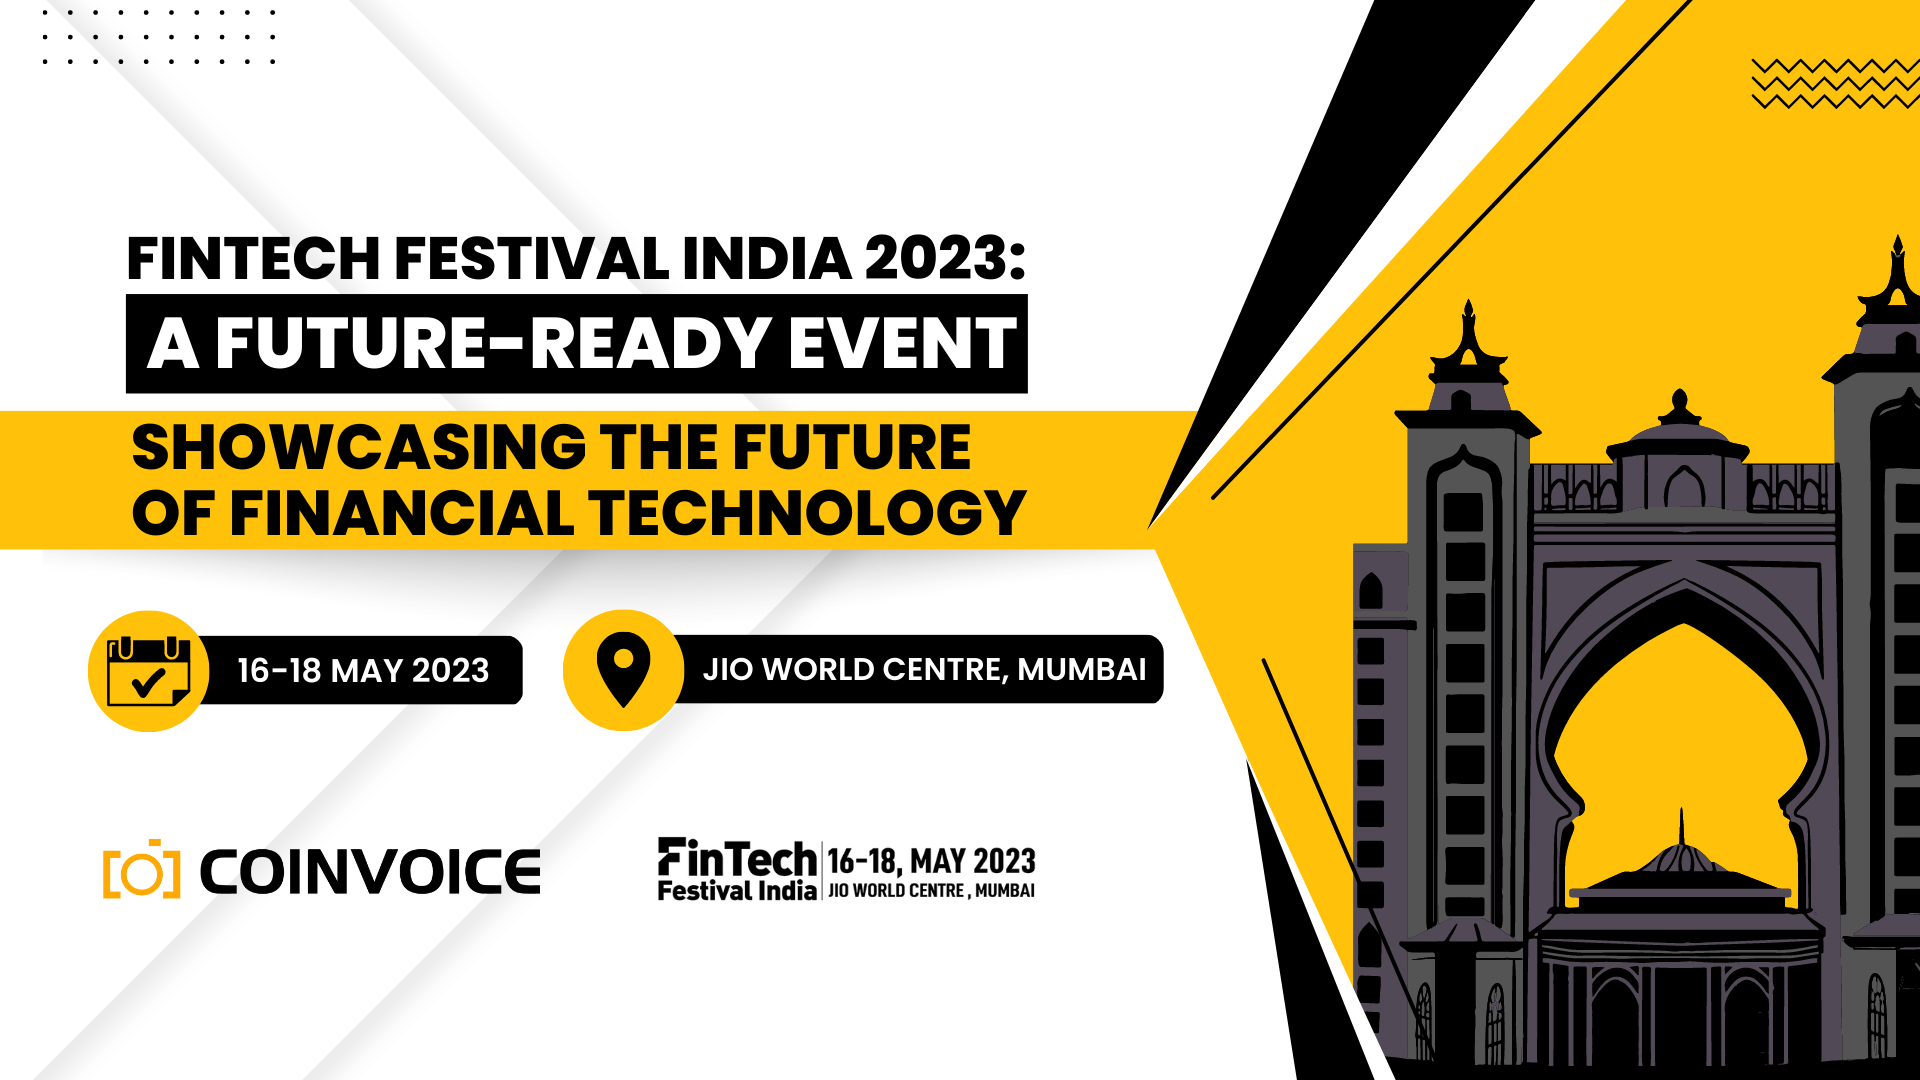 FinTech Festival India 2023: A Future-Ready Event Showcasing the Future of Financial Technology